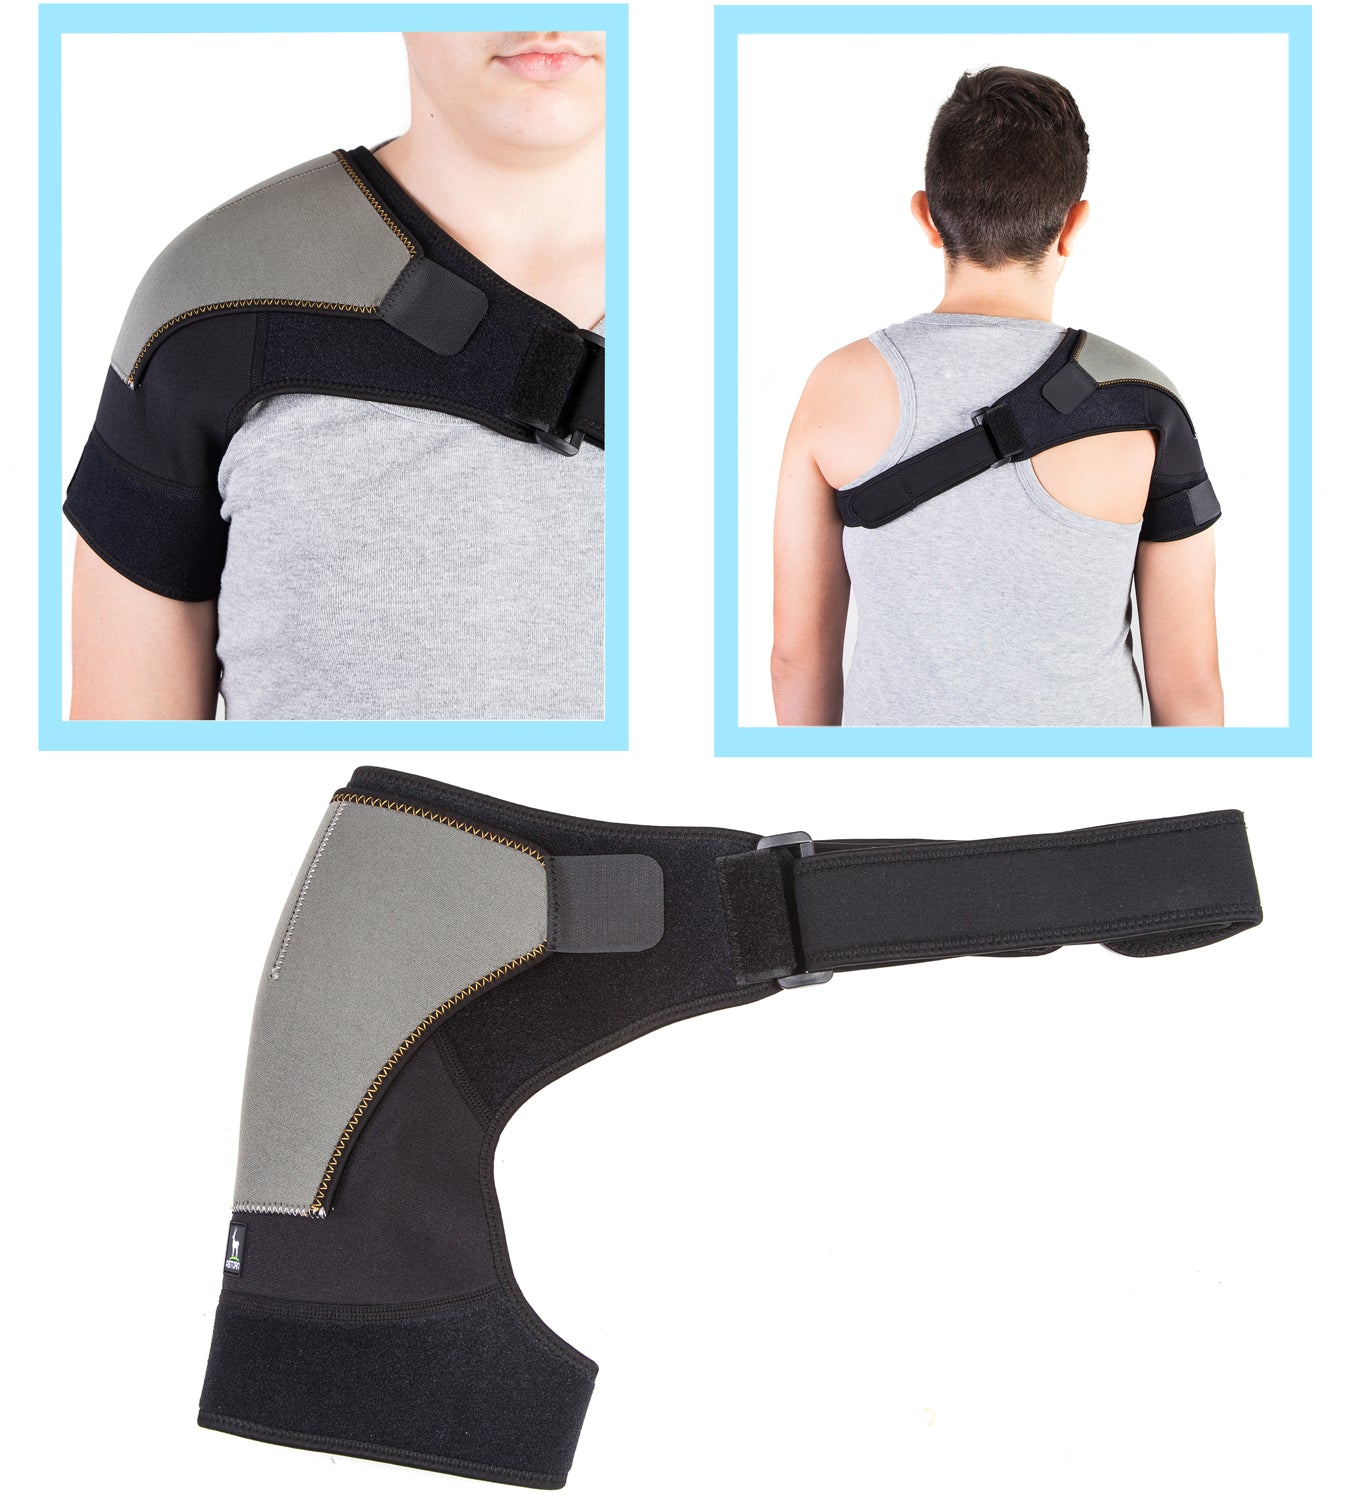 Astorn Adjustable Shoulder Brace for Rotator Cuff and AC Joint